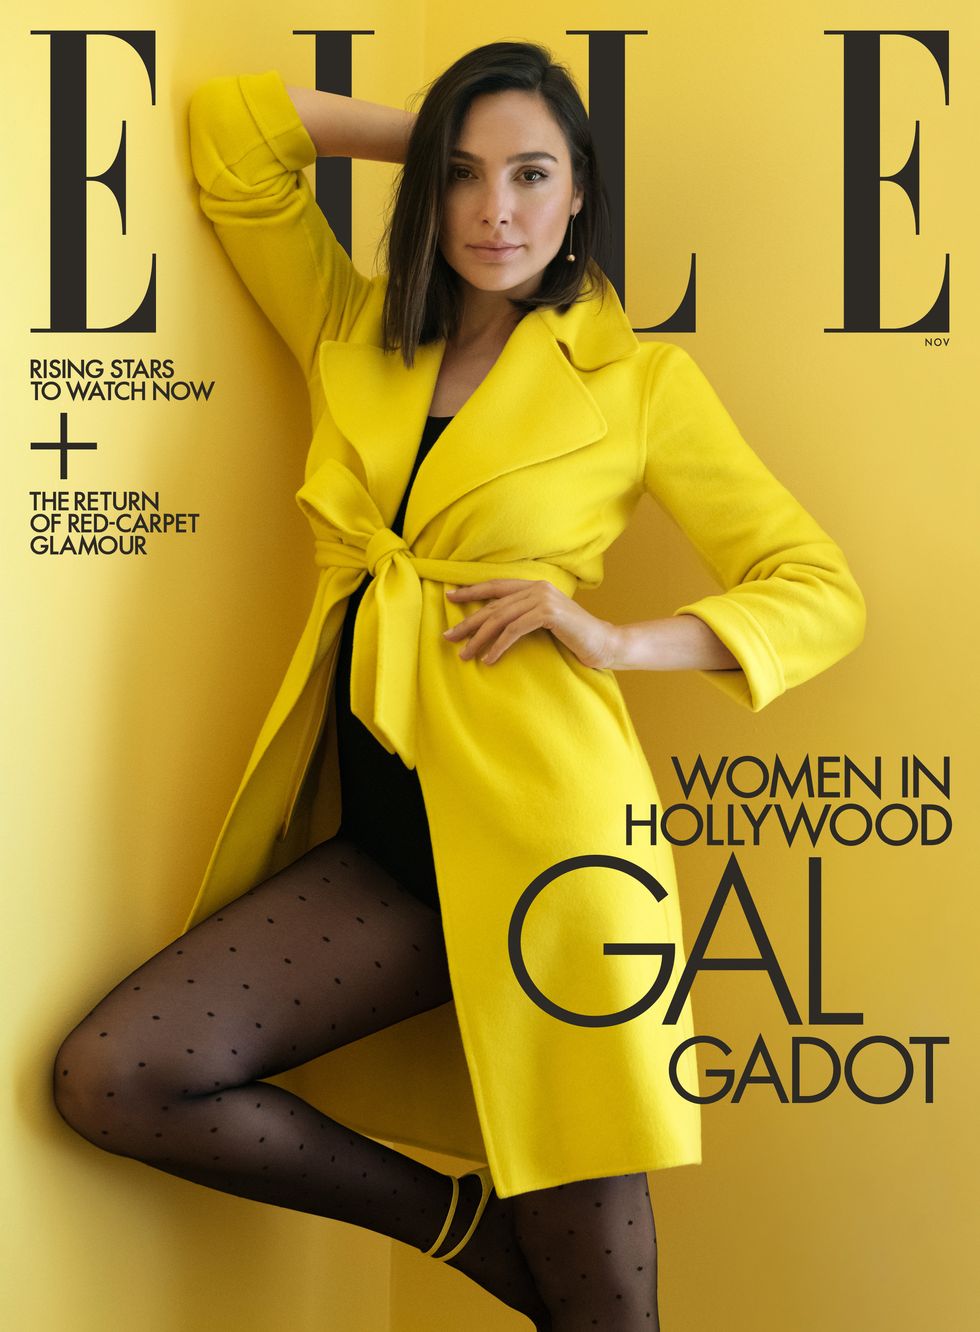 gal gadot on the cover of elle